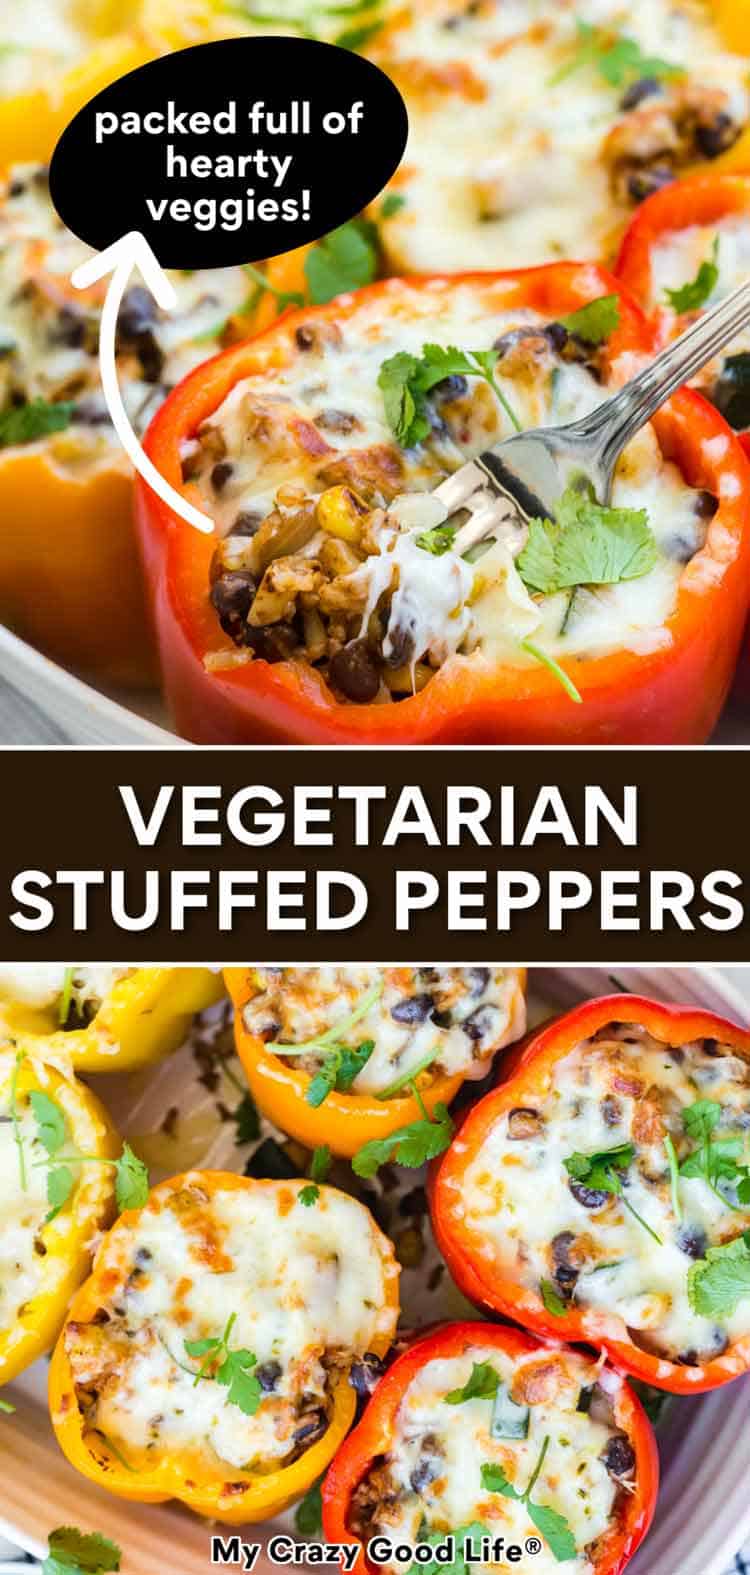 Healthy Vegetarian Stuffed Peppers Recipe | My Crazy Good Life